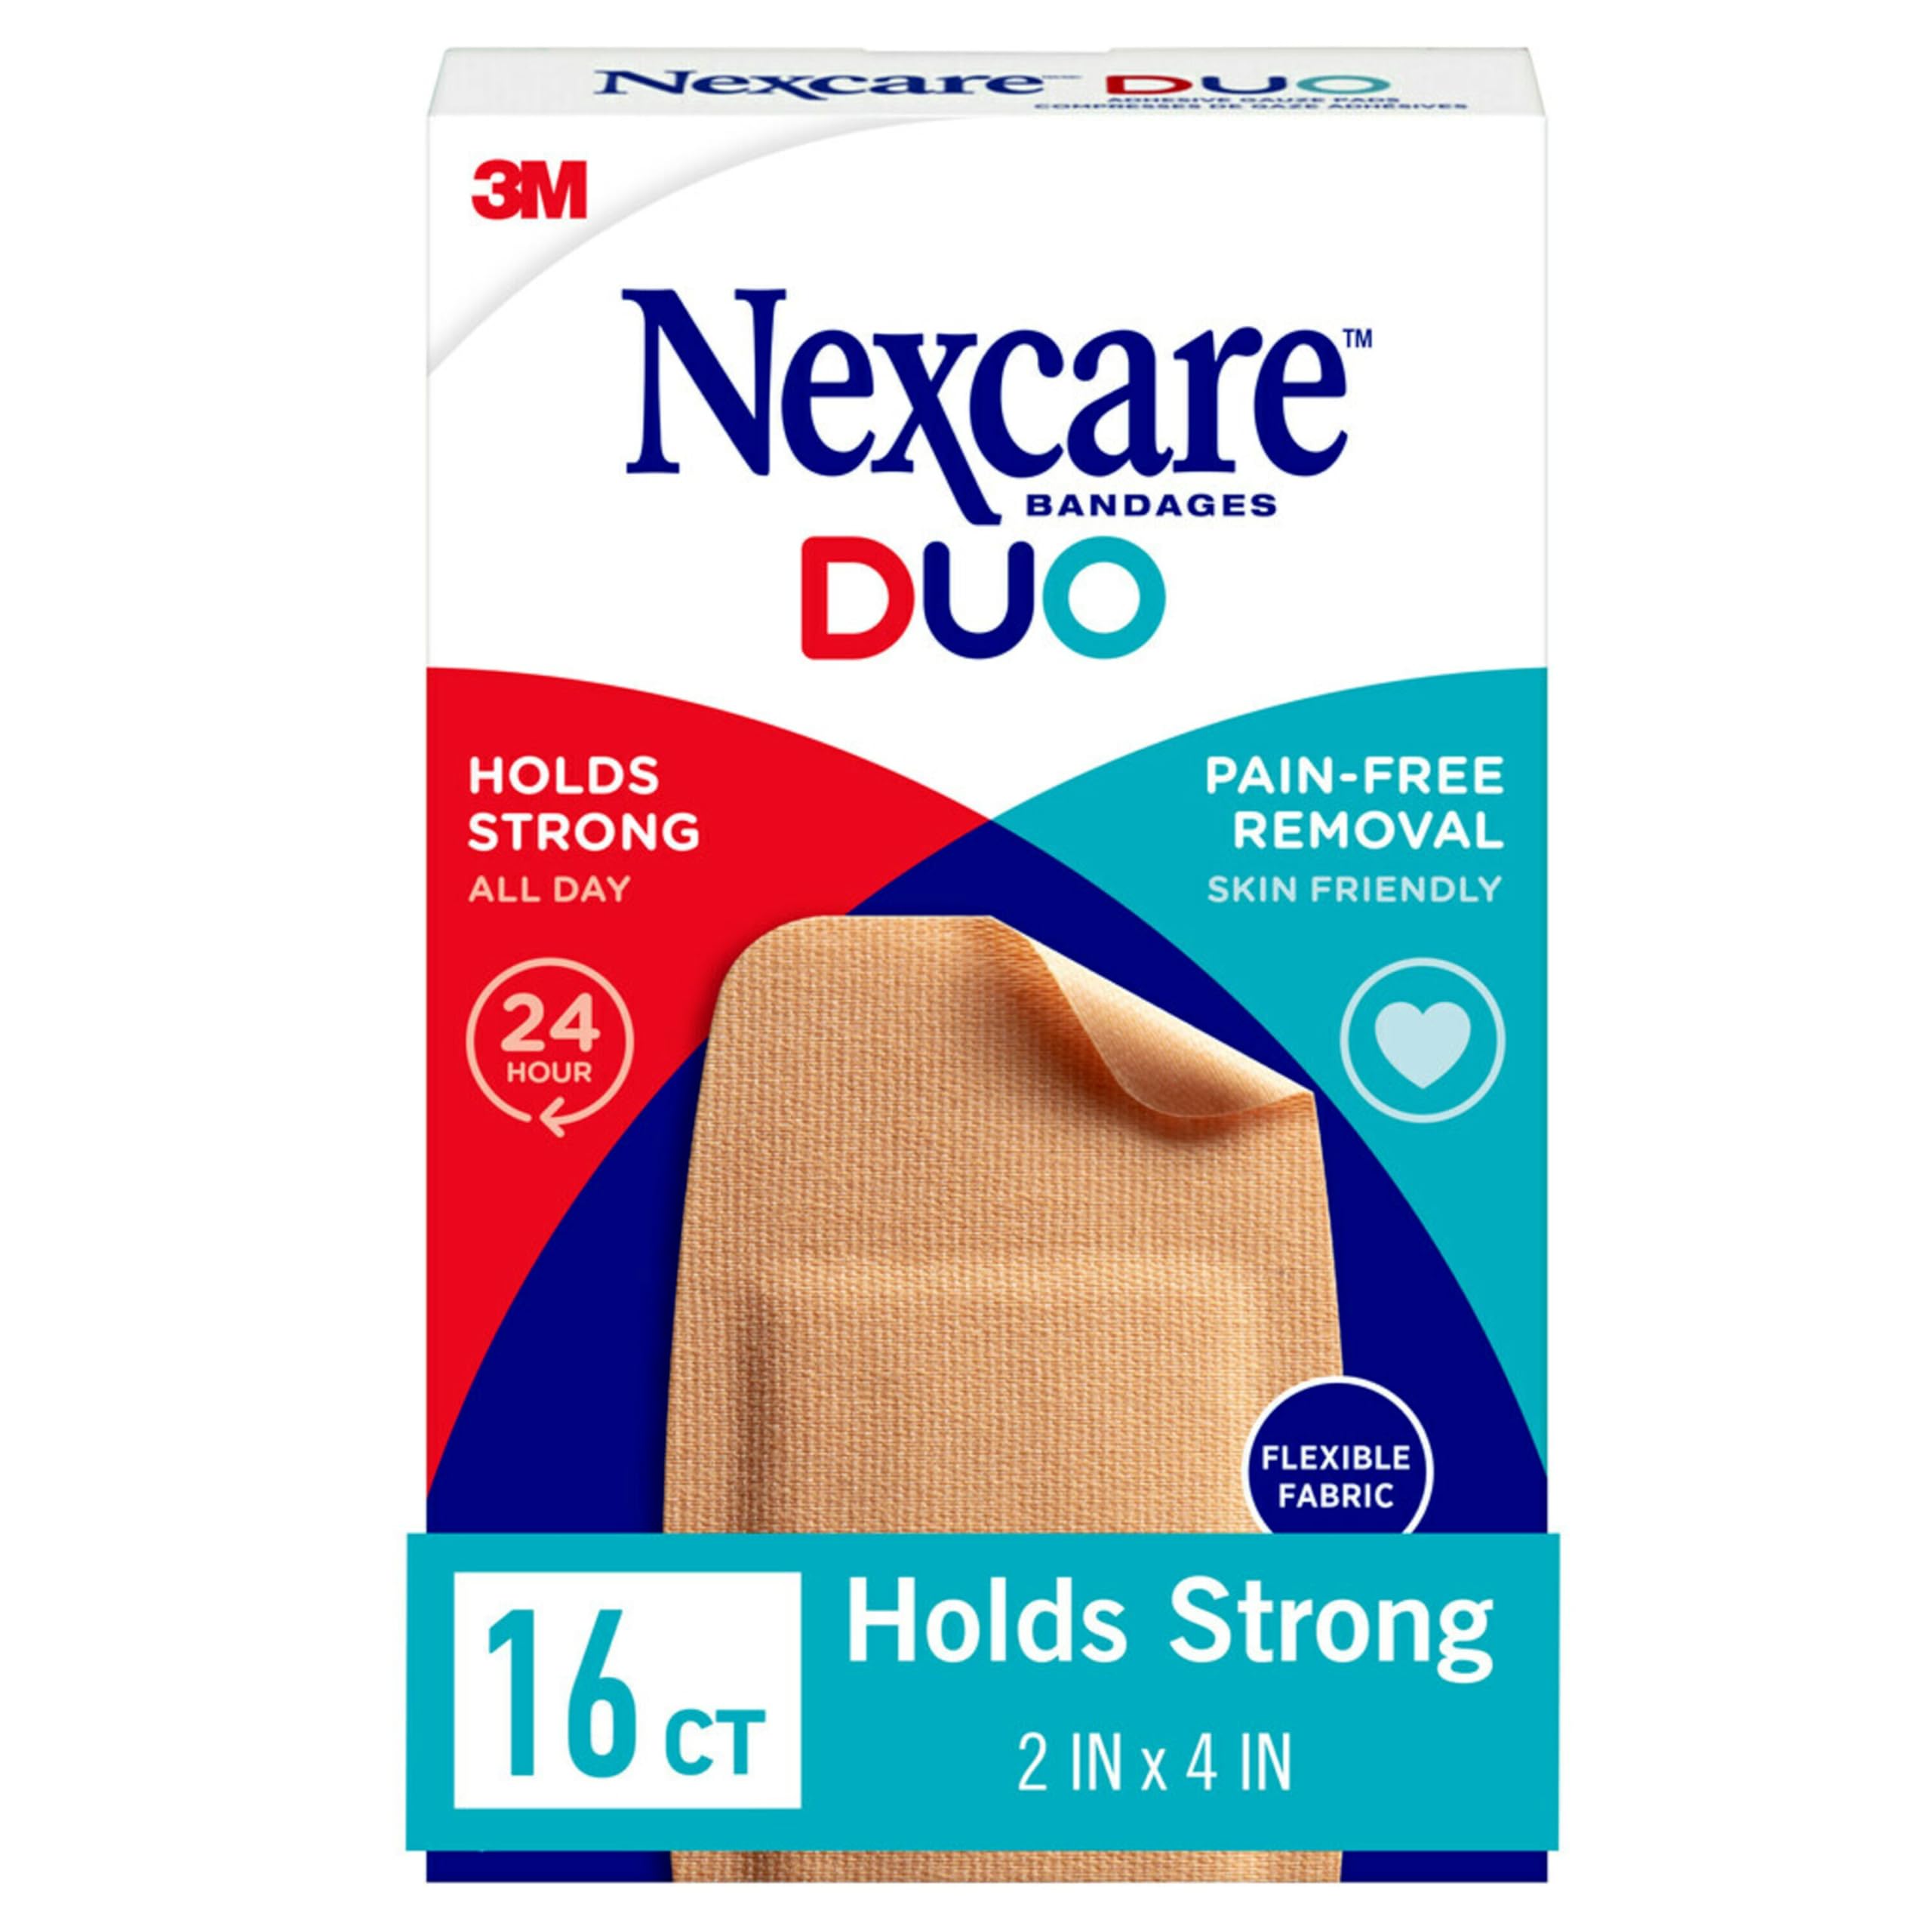 Nexcare Duo Bandages, Painless Removal, Strong Adhesive Bandages Stay on for 24 Hours, Flexible Fabric Construction - 16 Pack Adhesive Bandages